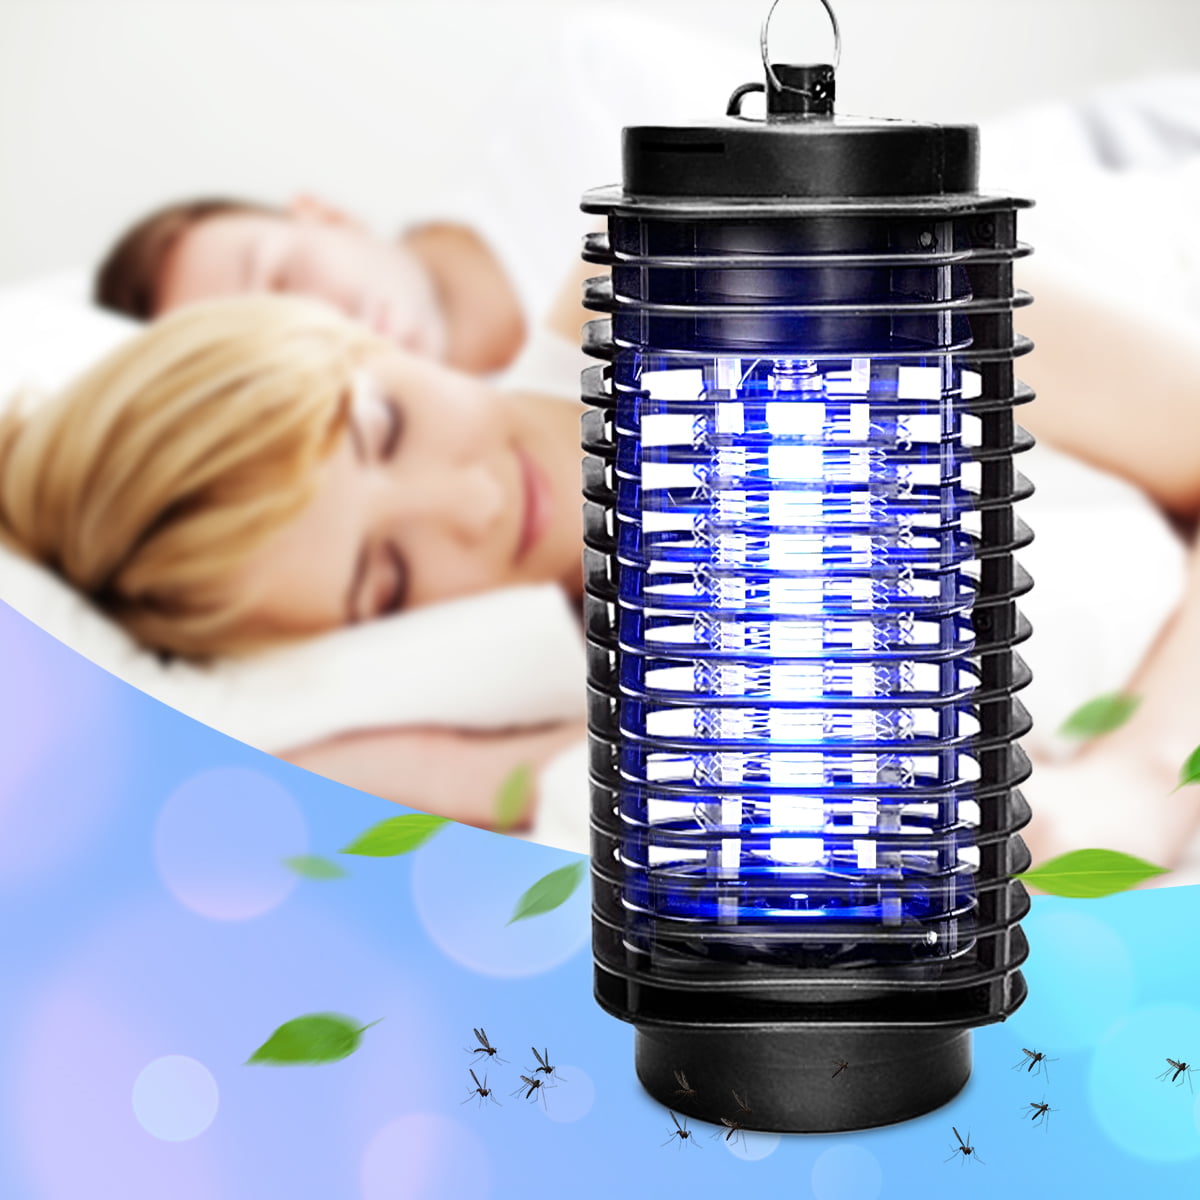 Electric 110V Mosquito Killer Lamp Insect Zapper Bug Fly Control US Plug 